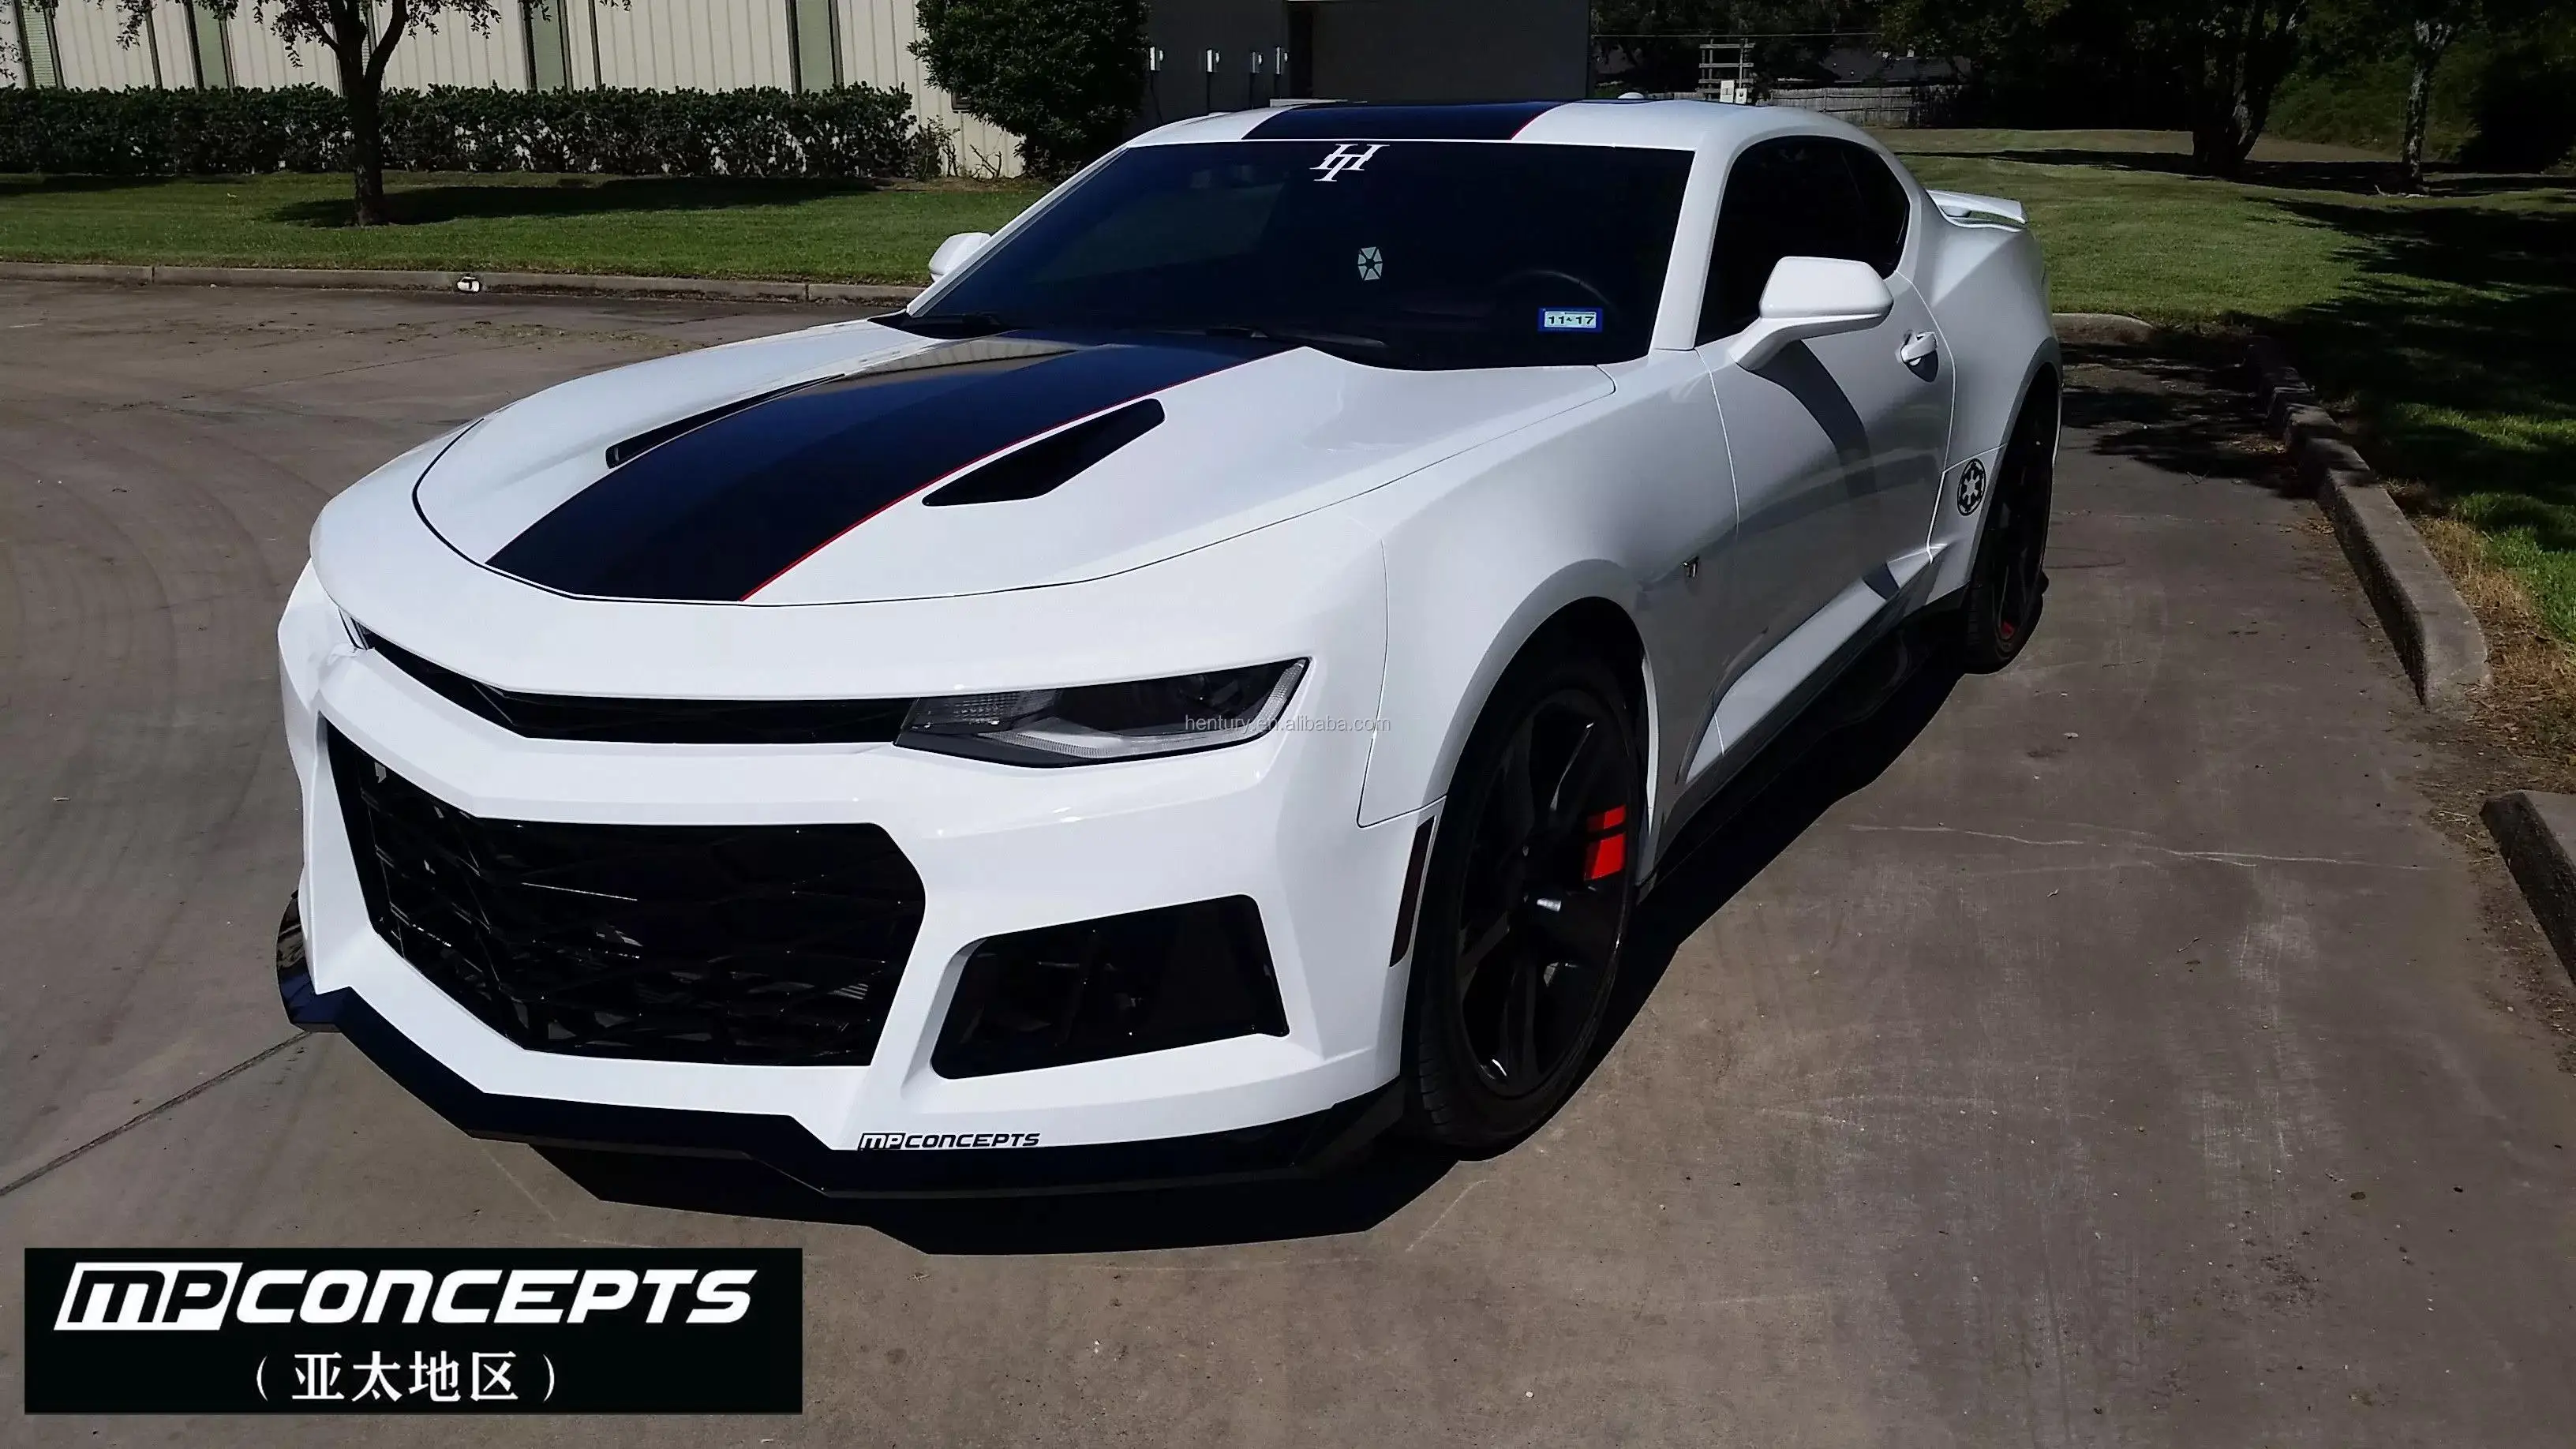 Mp Concepts Zl1 1le Style Front Bumper Kit/body Kit For 2016-2018 Chevrolet  Camaro - Buy 1le Style Bumper For Camaro 2016 2017 2018,Zl1 Style Body Kit  For Camaro 2016 2017 2018,Mp Concepts